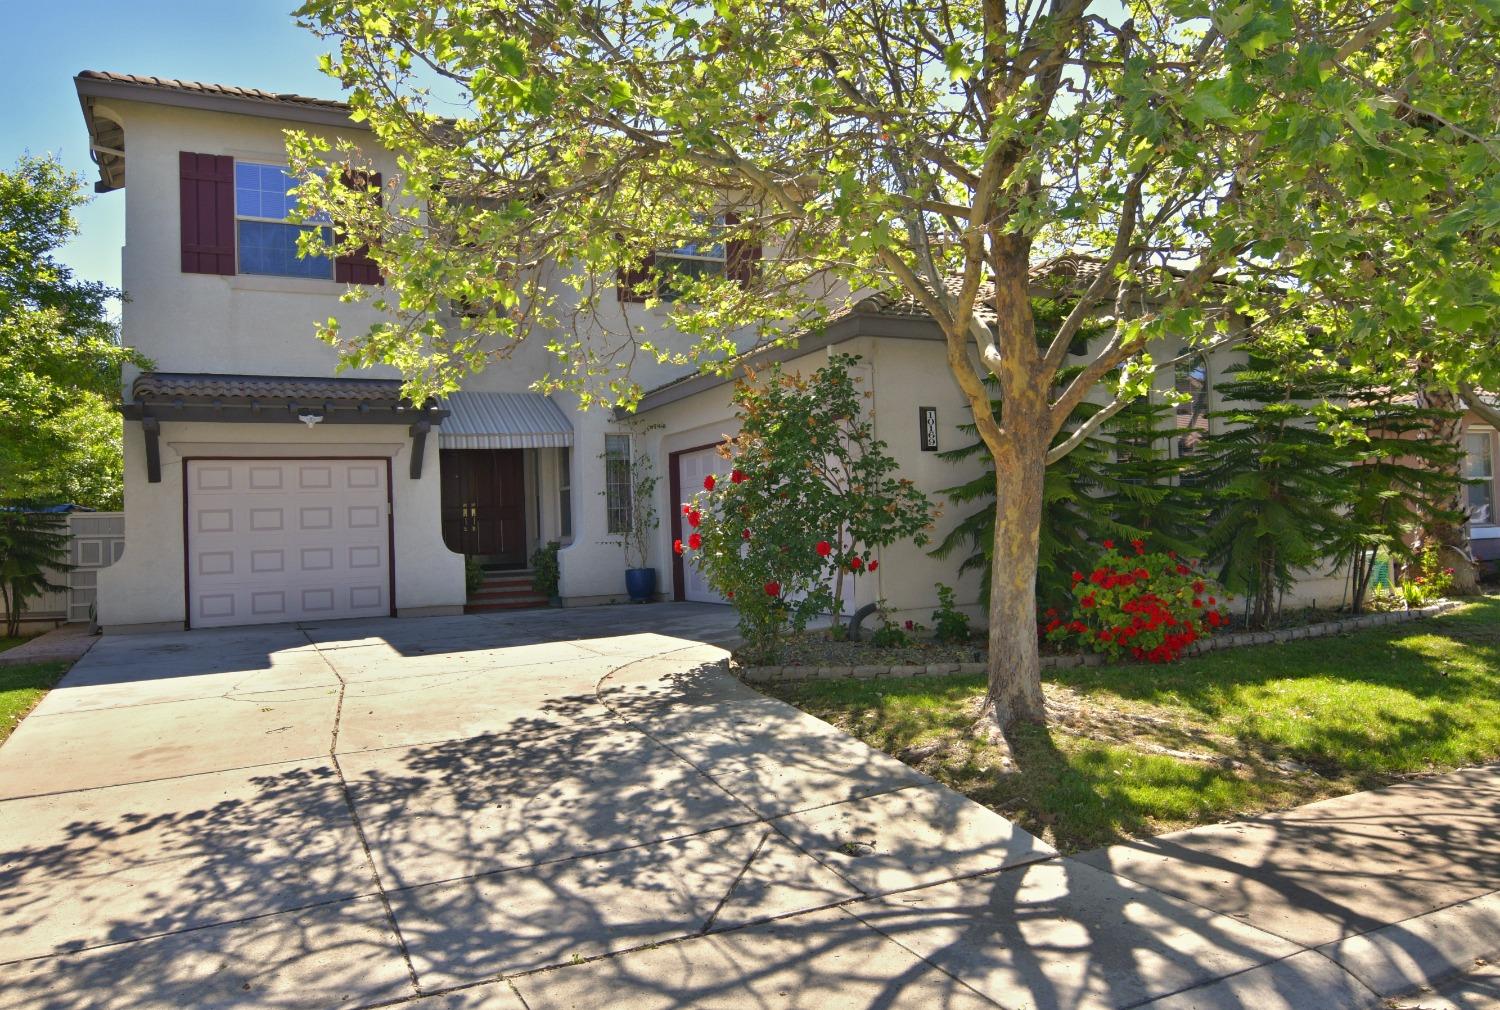 Welcome to 10169 Brenna Way, a beautifully crafted home nestled in the heart of Elk Grove just block